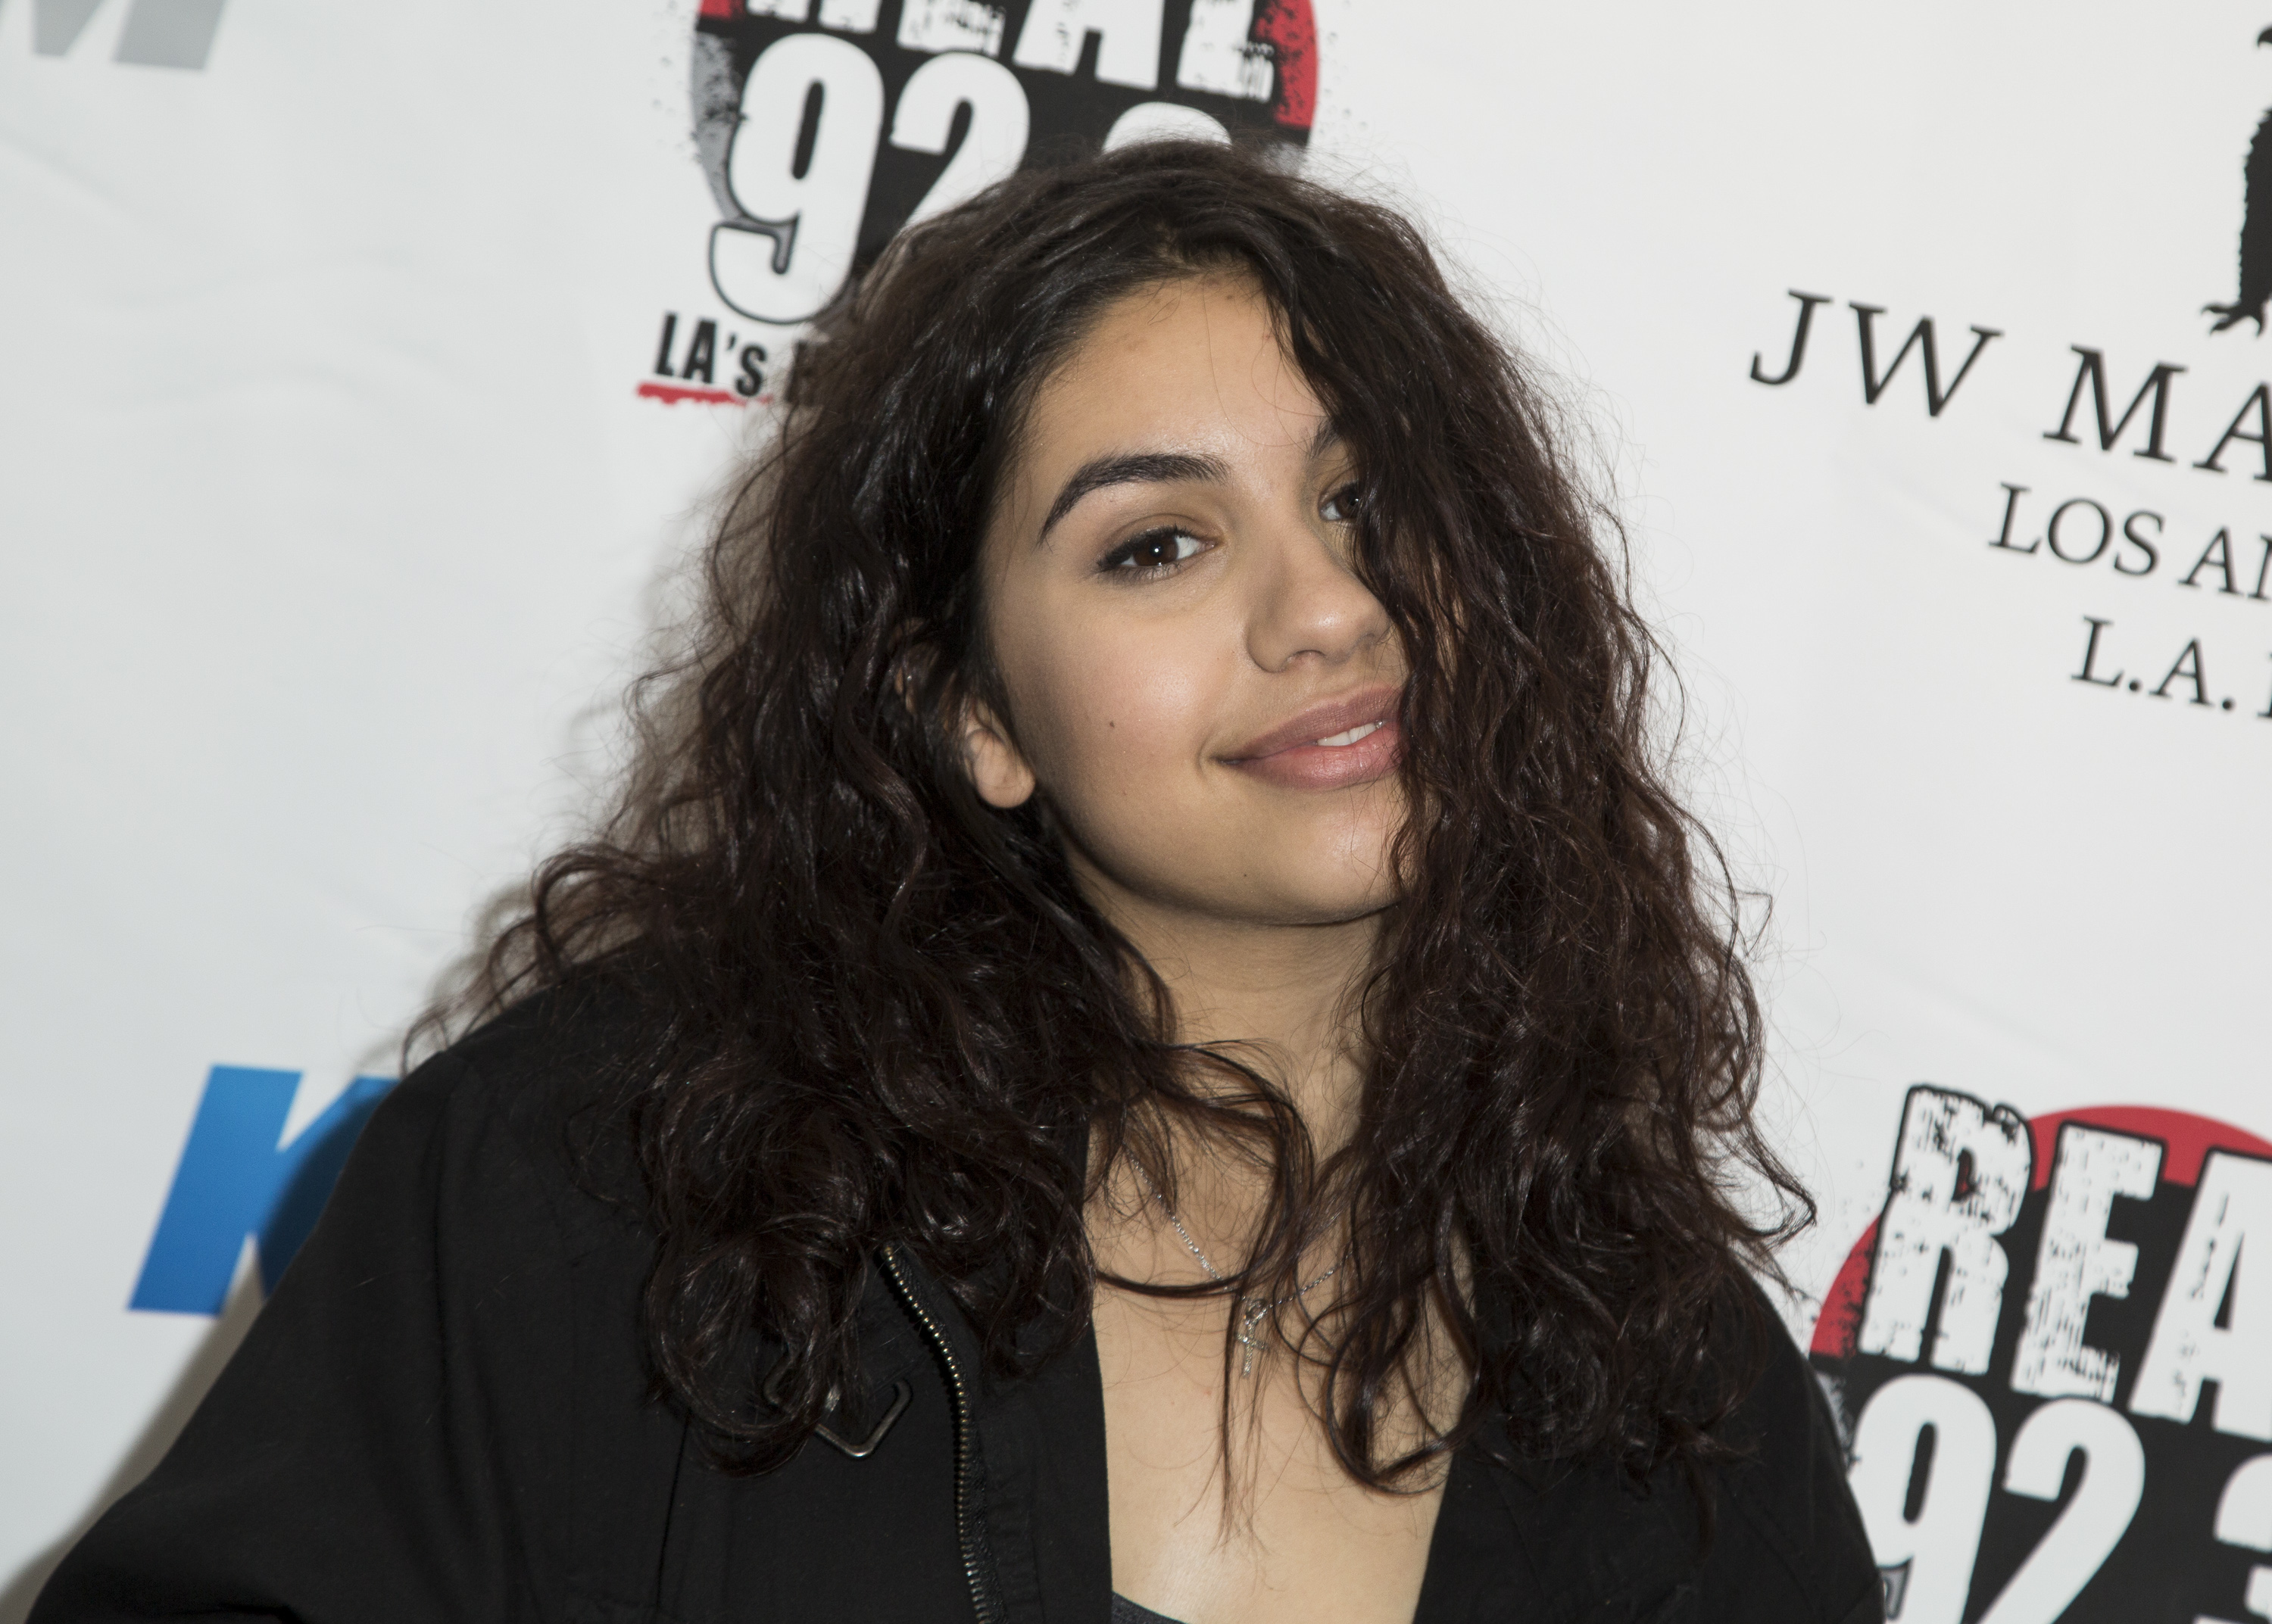 Alessia Cara Visits The Late Late Show And Performs 'Here' .